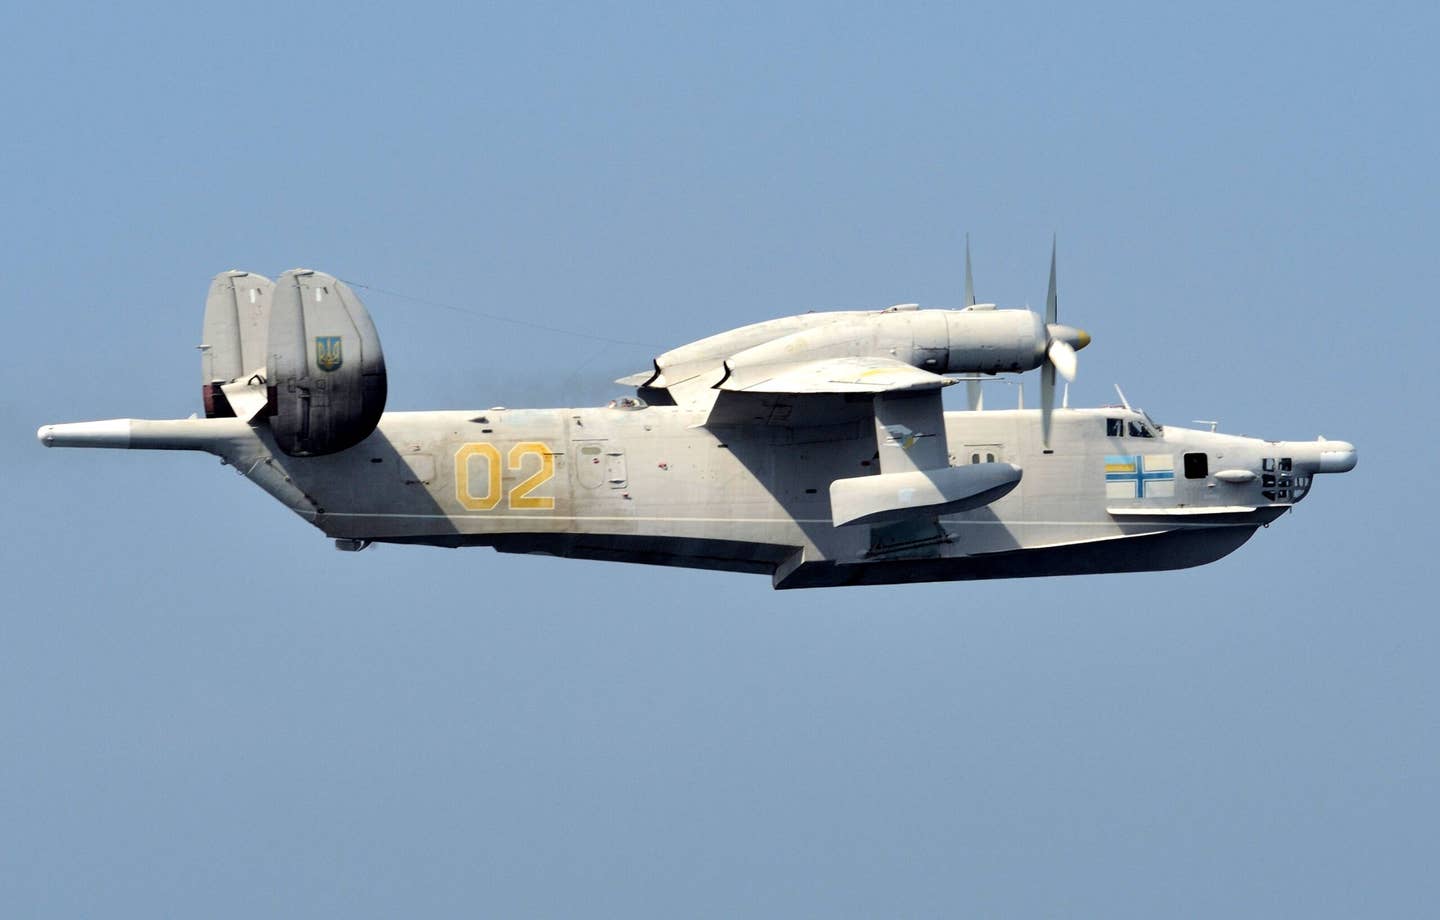 A Ukrainian Navy Be-12 participates in Exercise Sea Breeze over the Black Sea in 2014. <em>U.S. Navy photo by Mass Communication Specialist 2nd Class John Herman/Released</em>